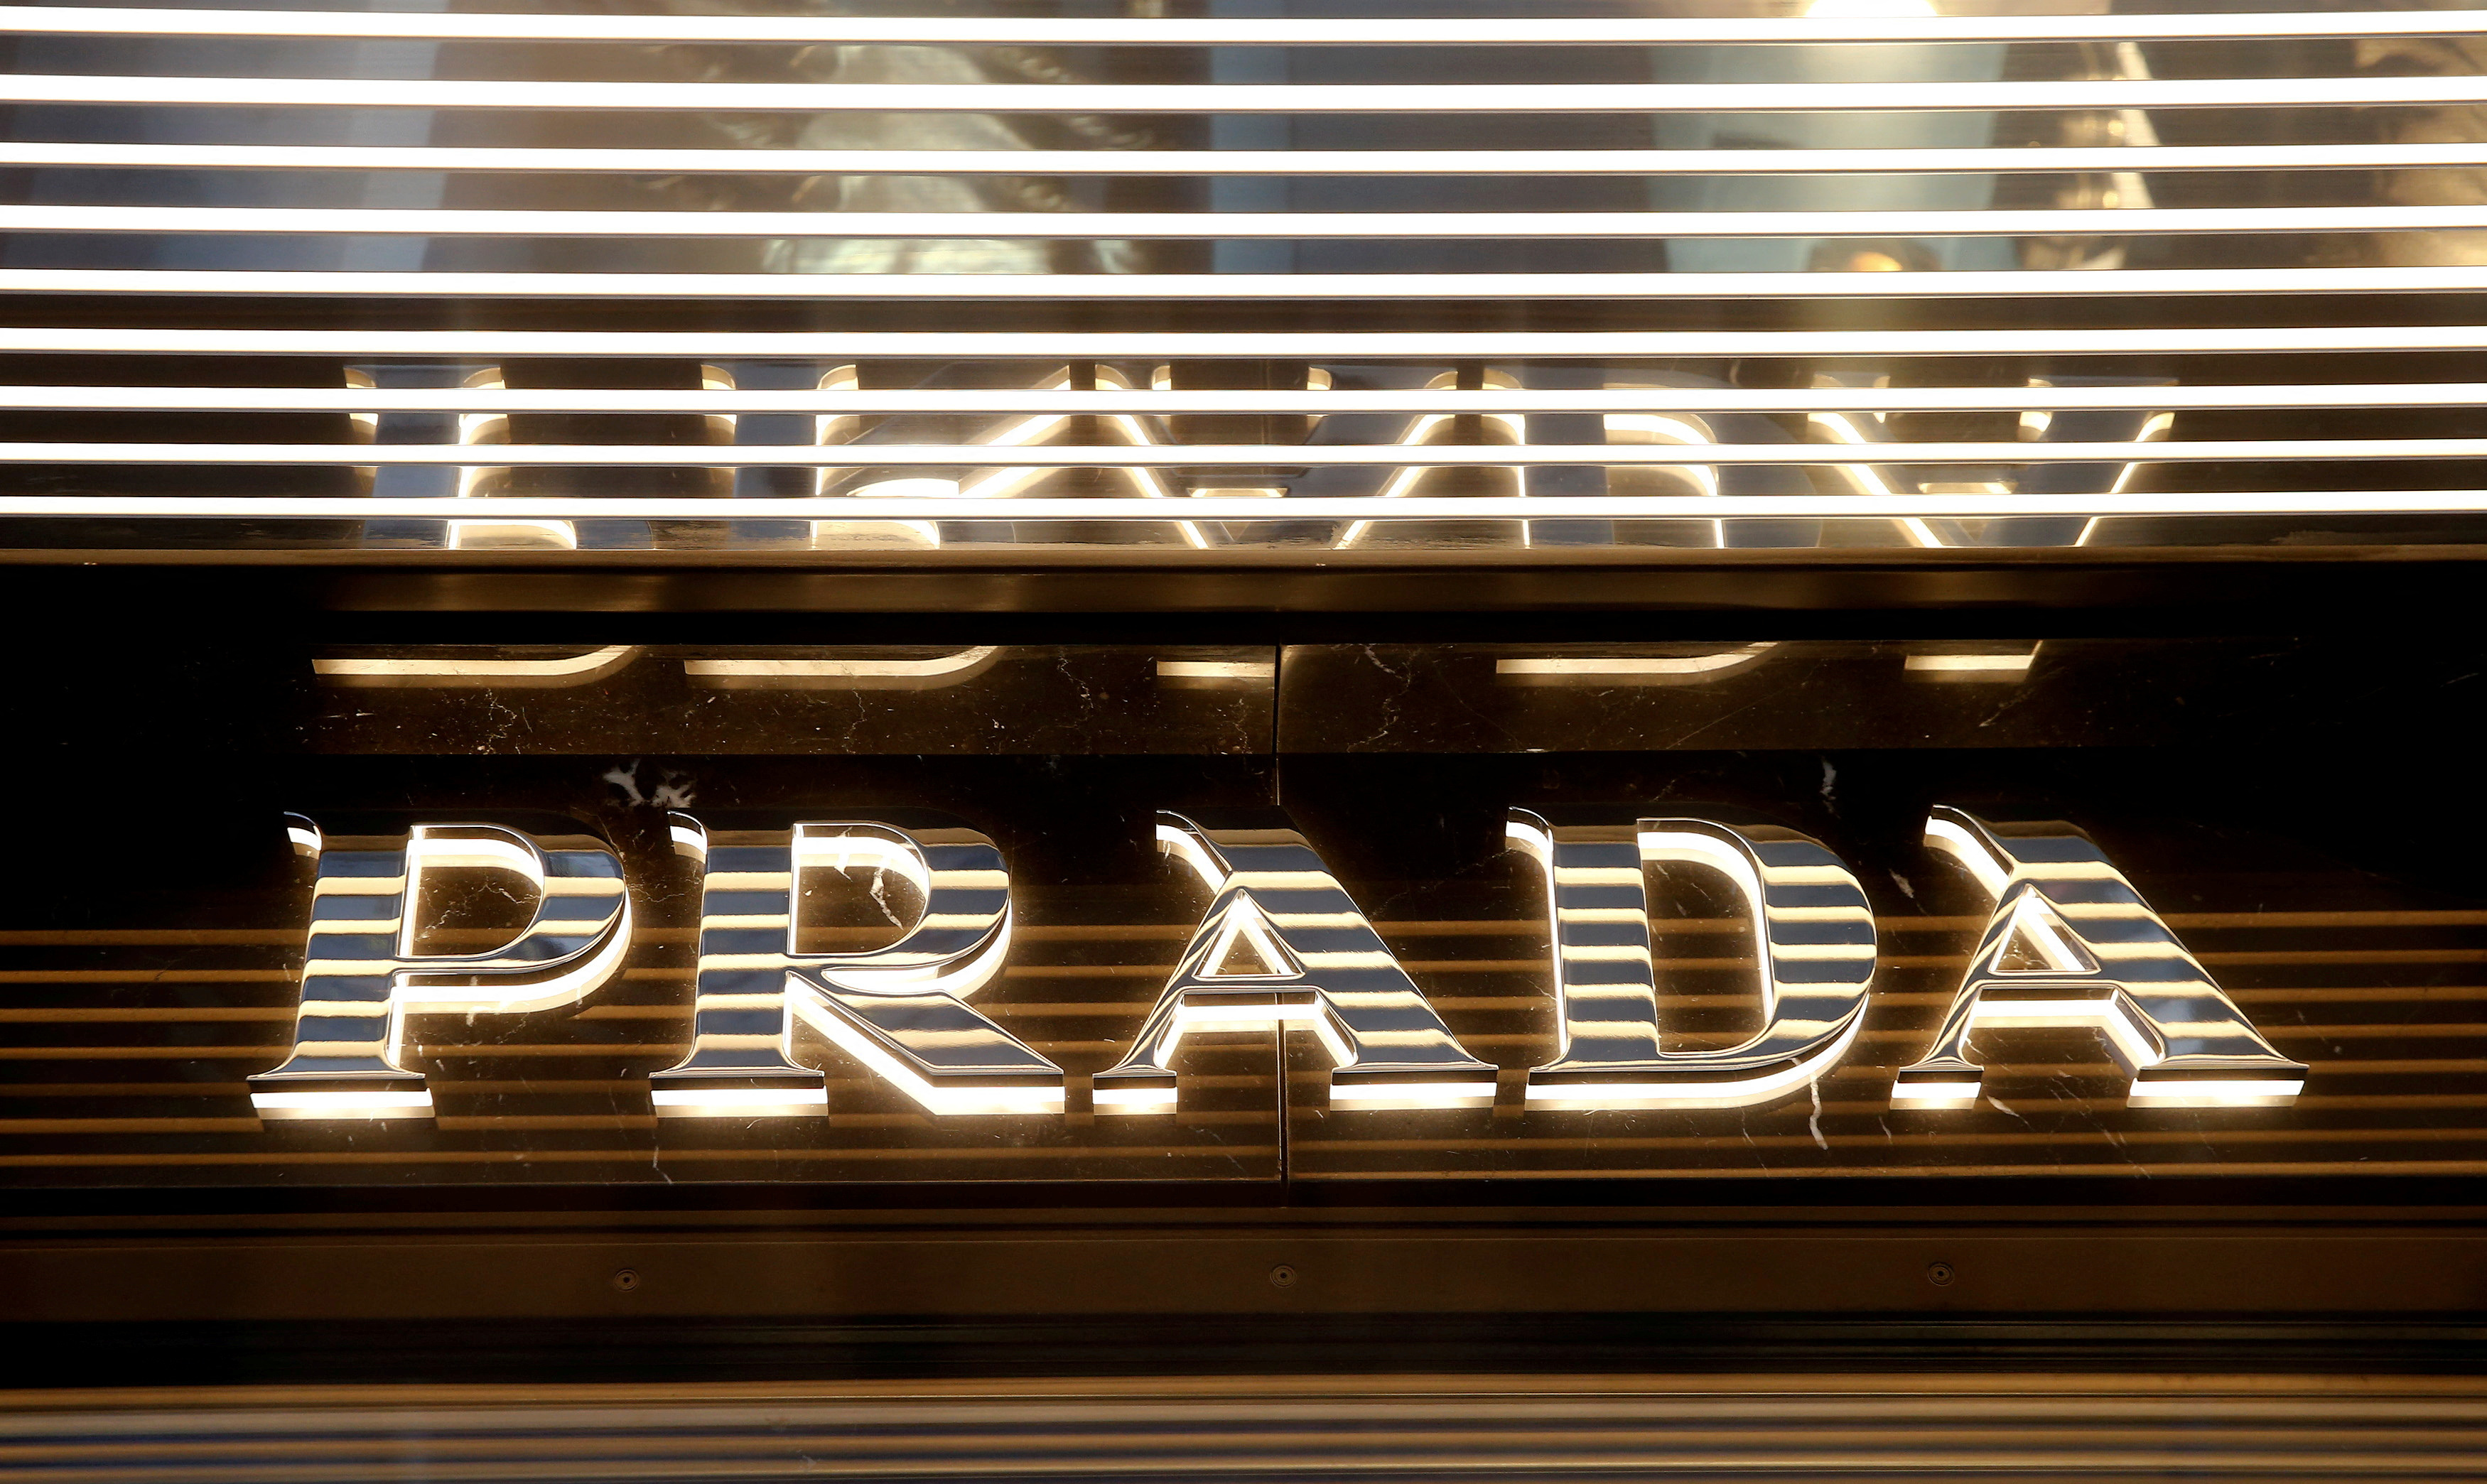 Prada turns to ex-Luxottica CEO Guerra to ease succession - source | Reuters